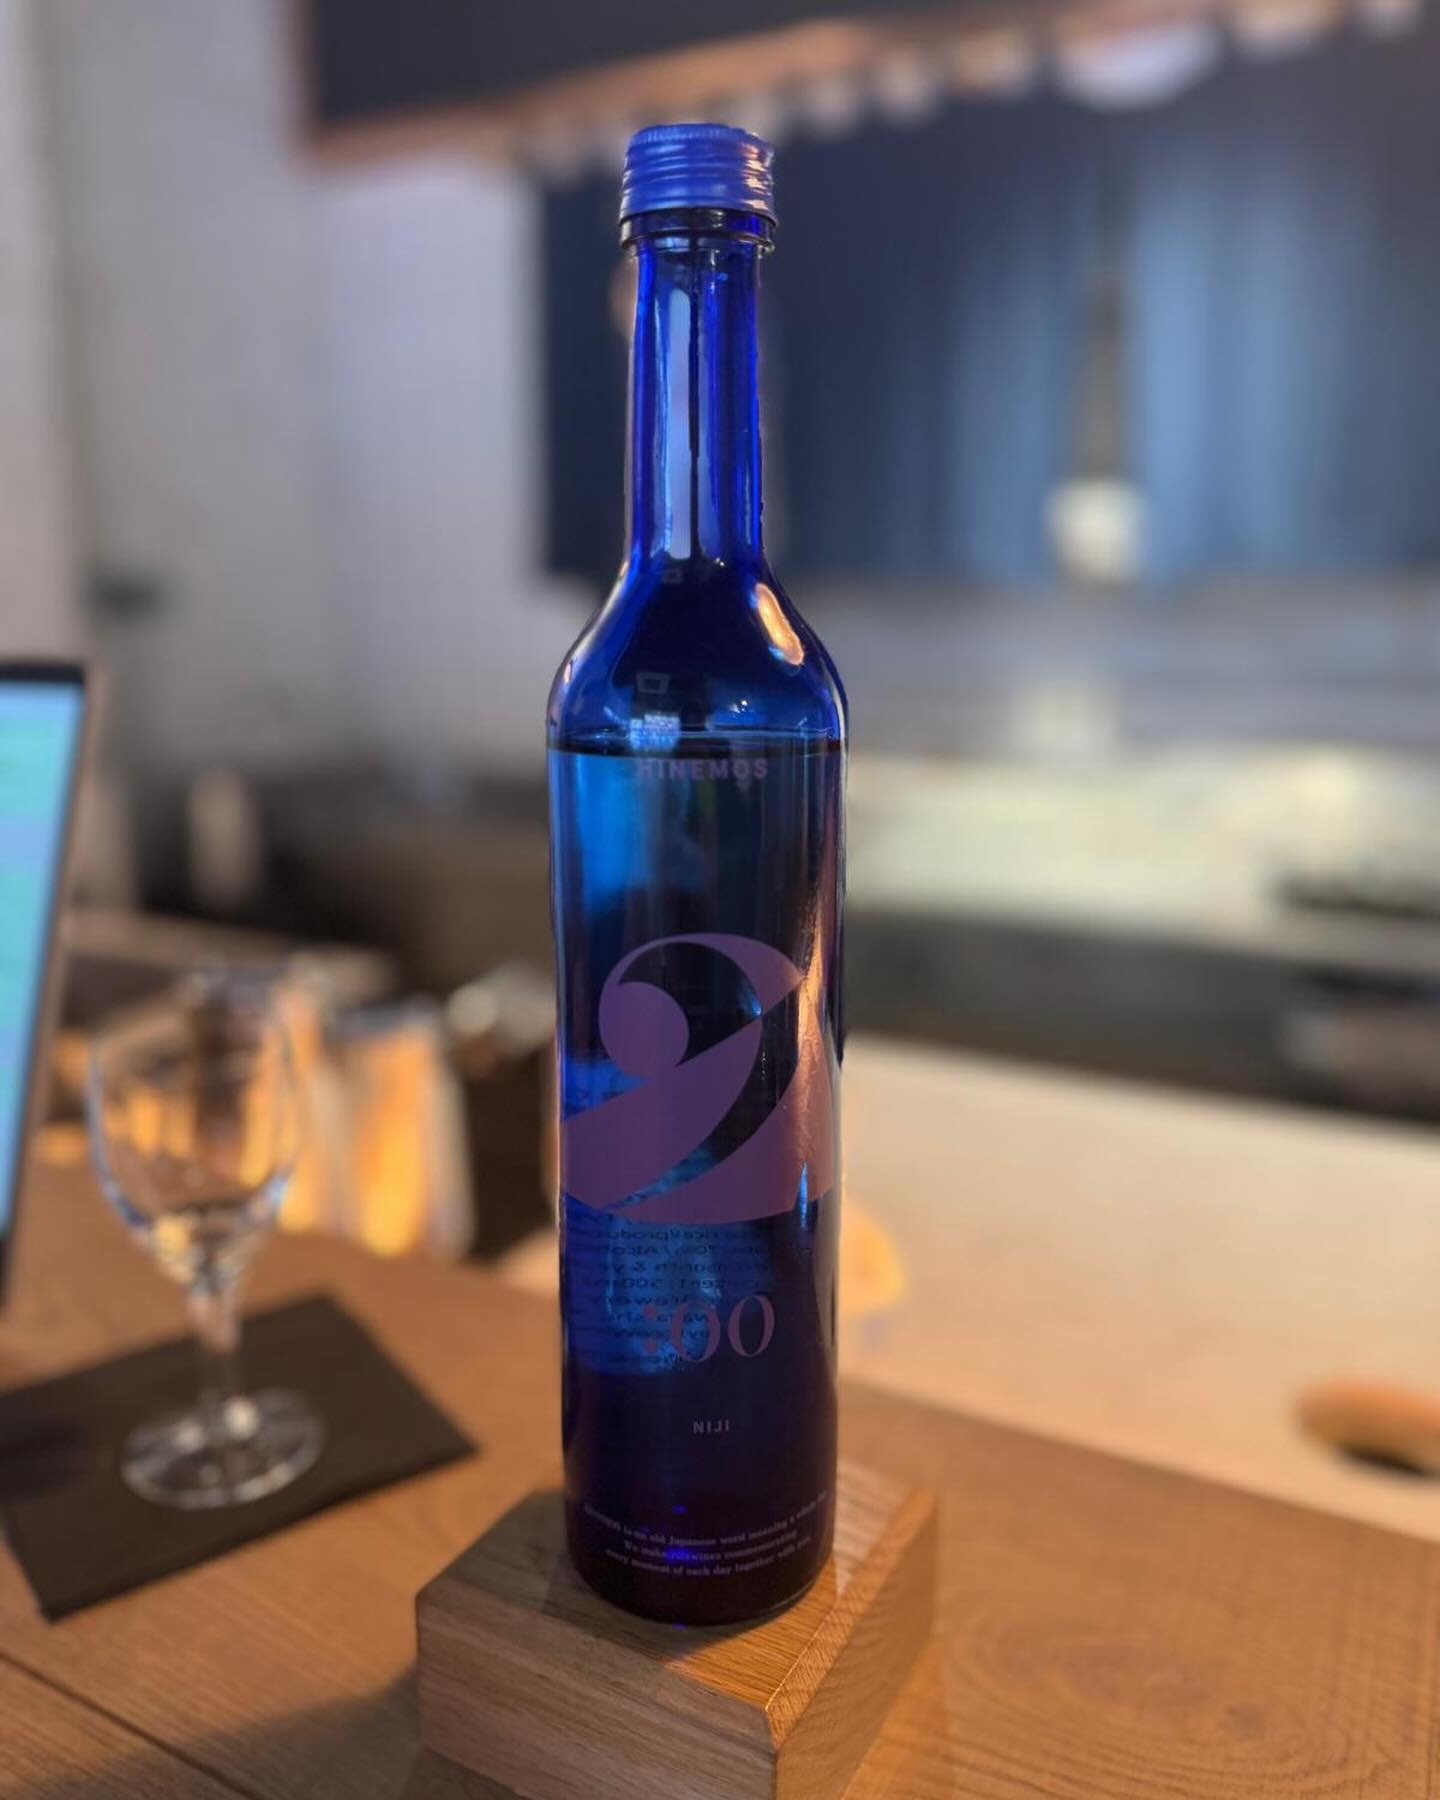 Friday Drinks : @sakecollective_uk 

We were lucky enough to go to a tasting this week at Sake Collective located 50m from our lab! Michael was an amazing host running through a real selection of incredible sake - So many different styles, ages and t